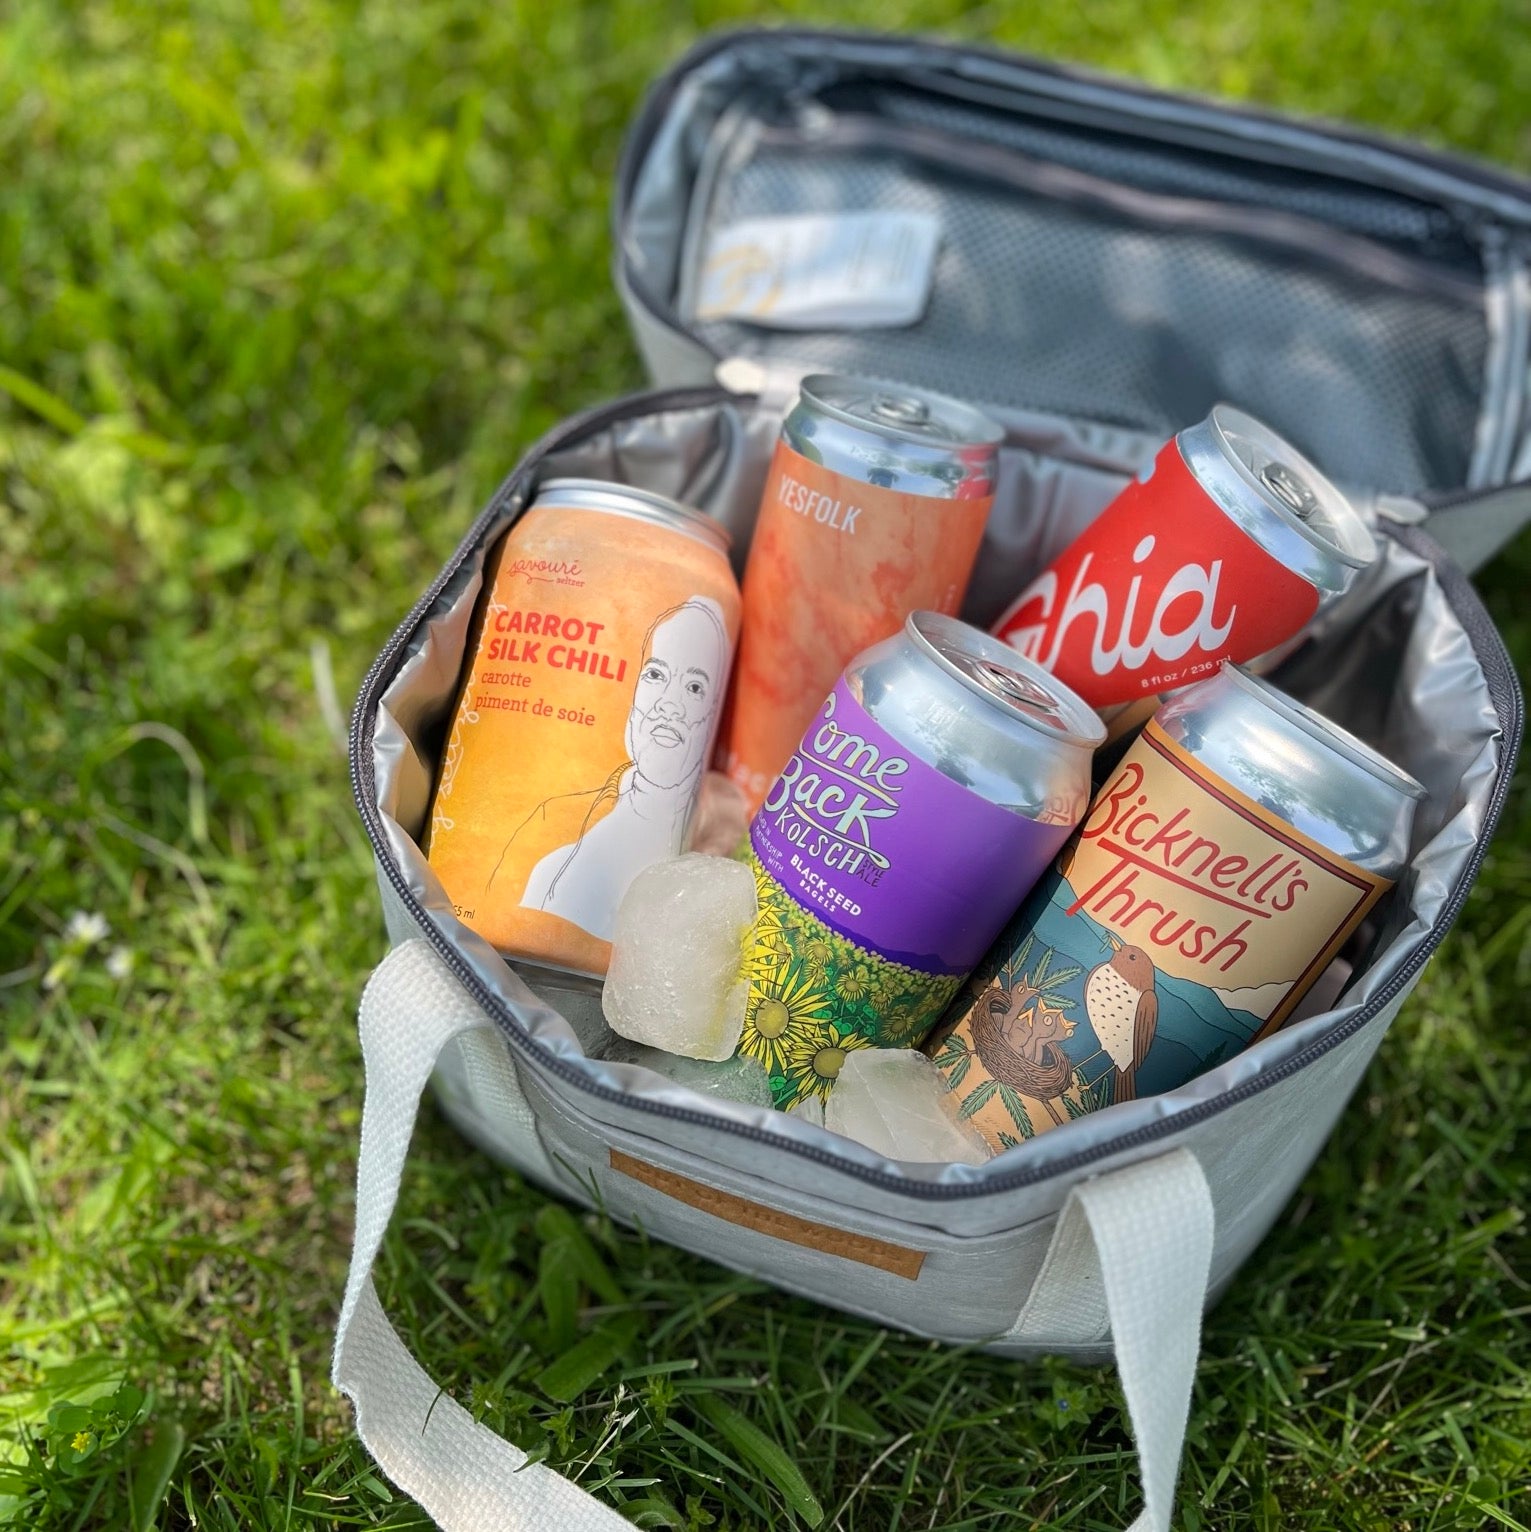 Out of the Woods Insulated Mini Picnic Cooler Bag